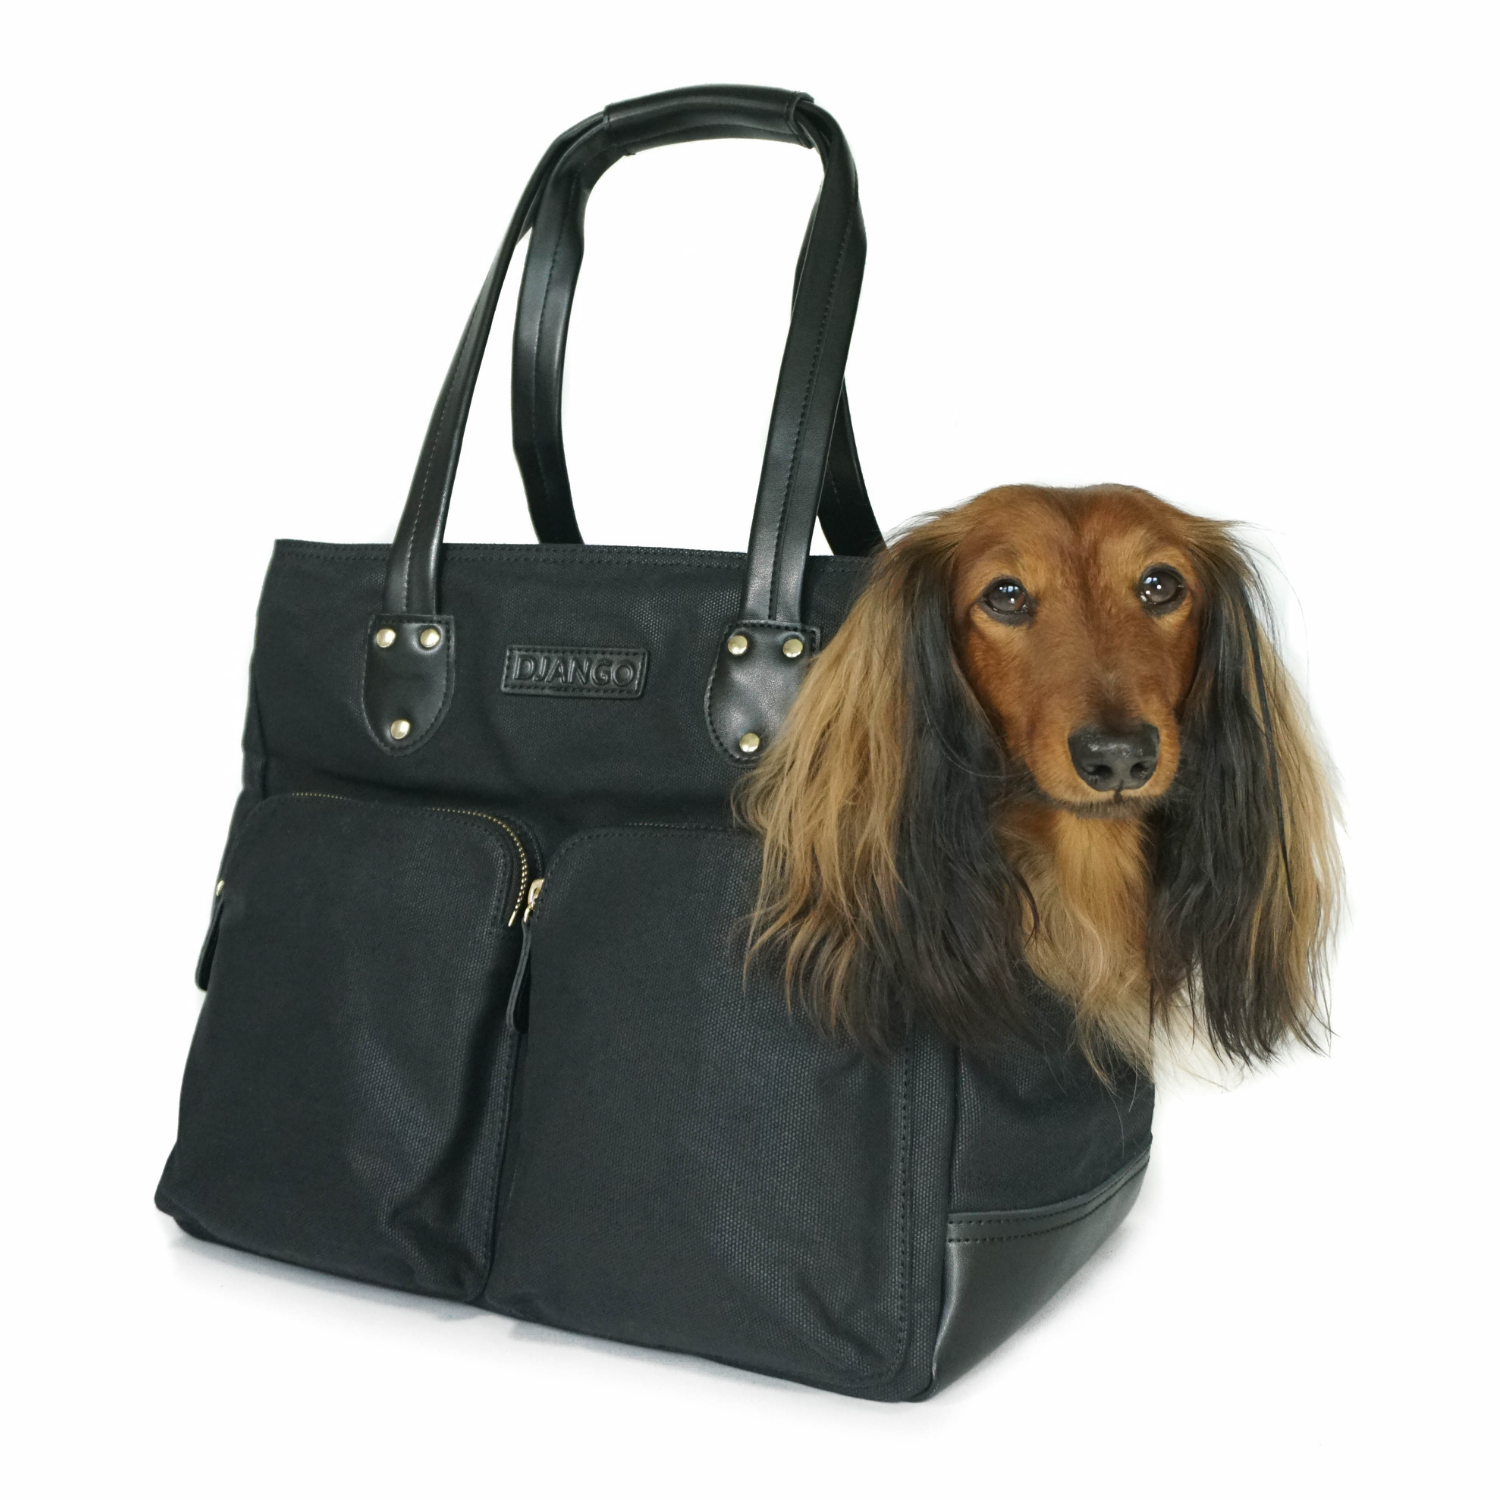 Minsong Pet Carrier Fashion Puppy Small Dog Purse Carrier, India | Ubuy